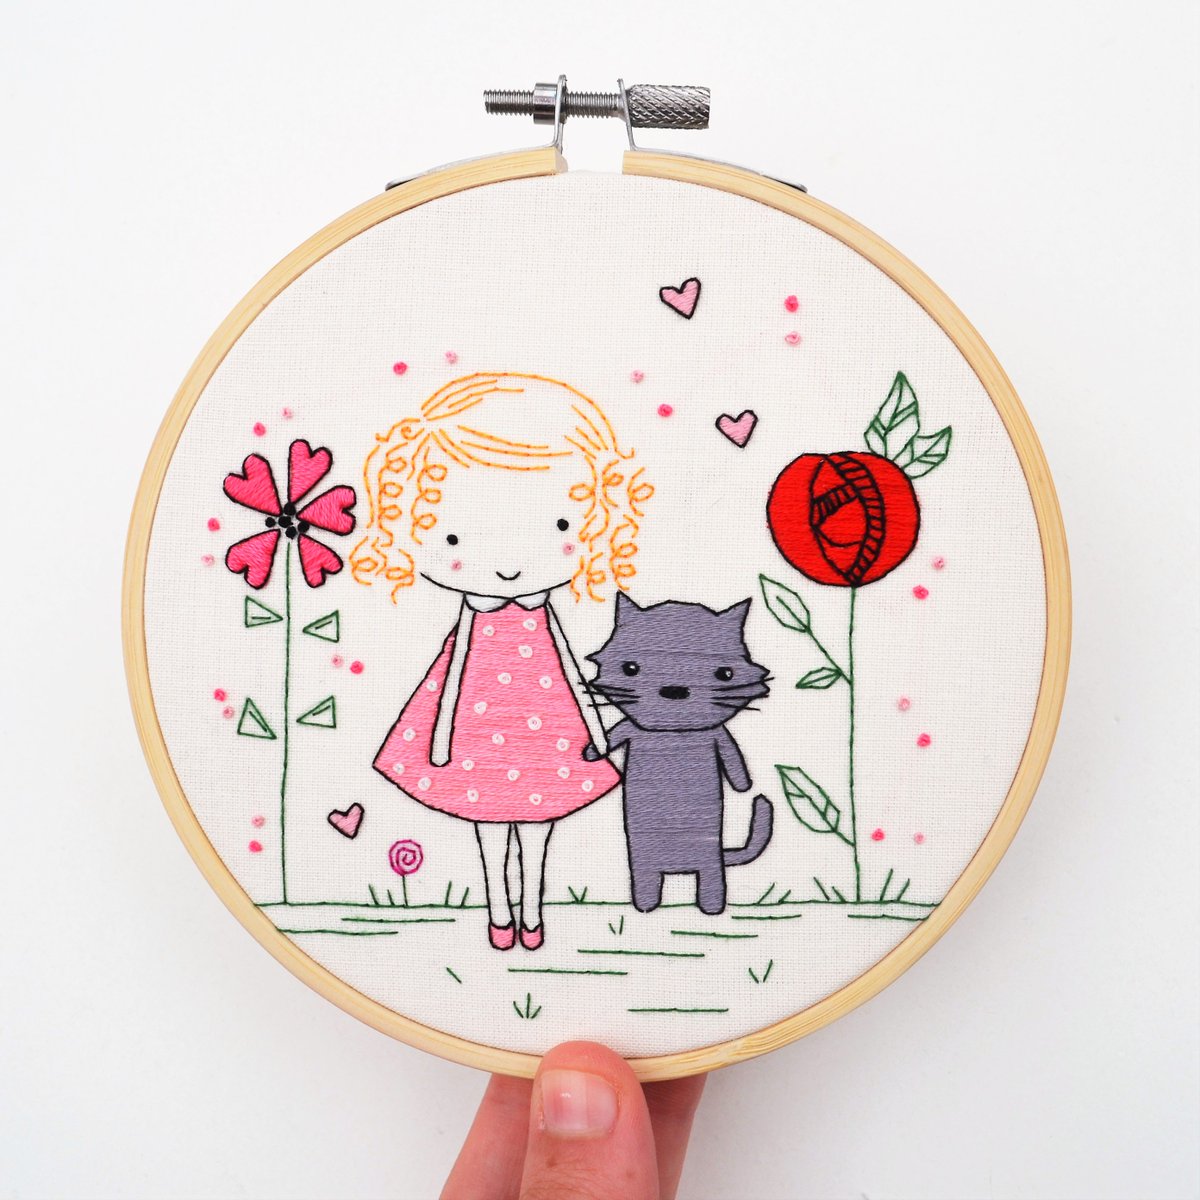 The Big Pixie Collab is just a few hours away! This adorable little pair with @daisyraedesign  are ready and waiting for you :) facebook.com/events/1775094…

#HandmadeHour #ukcreatives #womenwhomake #GRLPOWR #Textileart #bigpixiecollab #collaboration